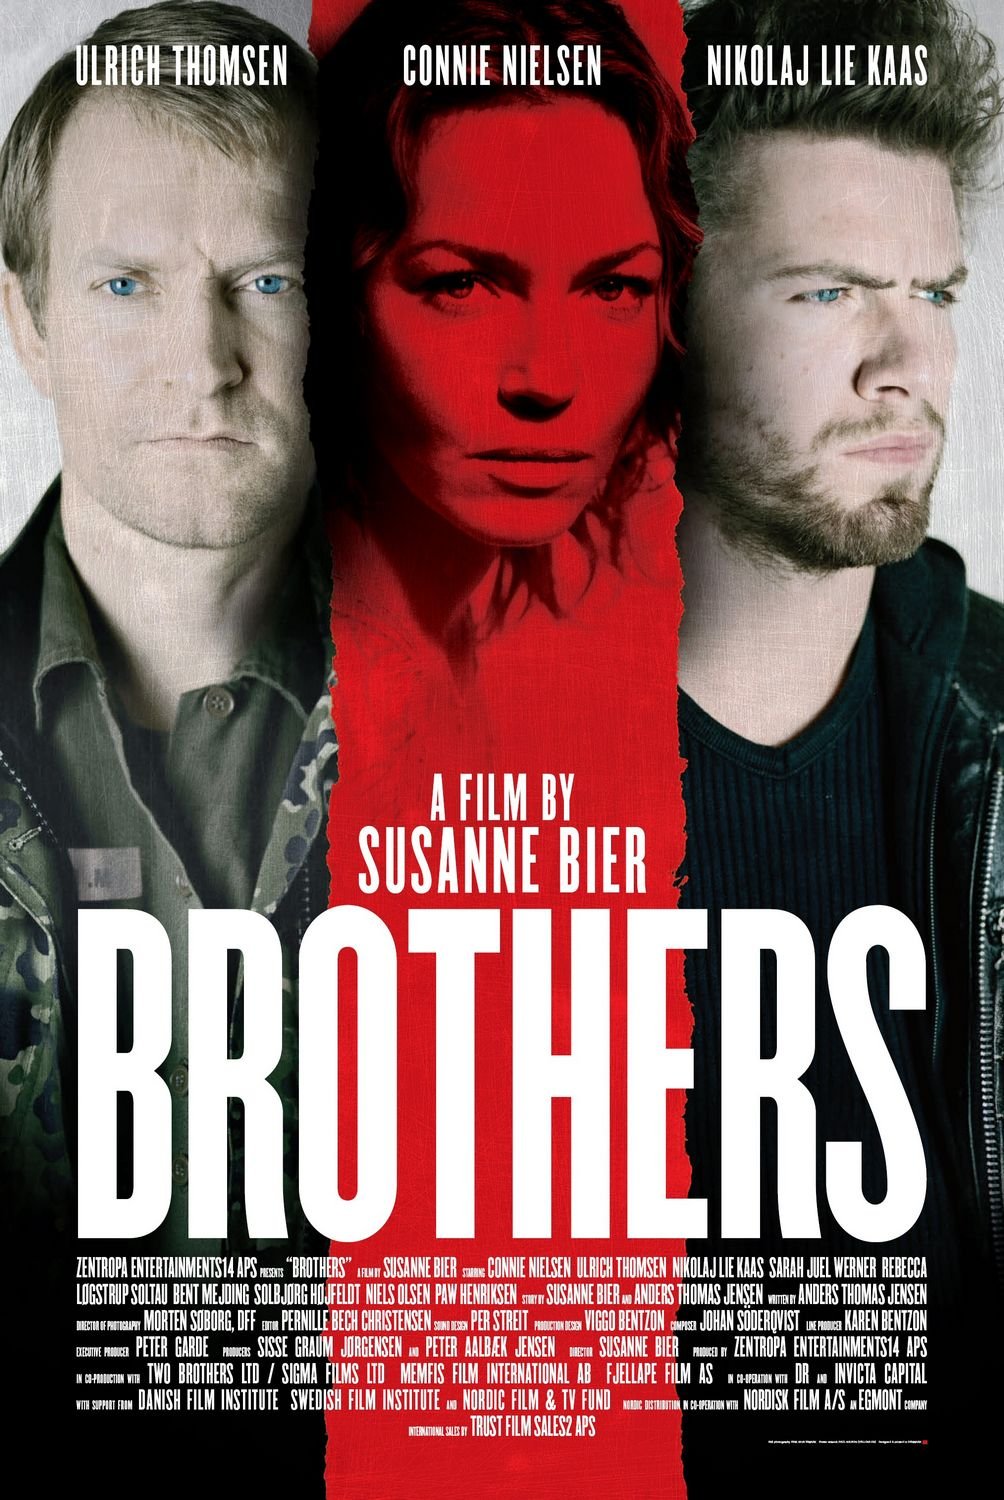 Poster of the movie Brothers